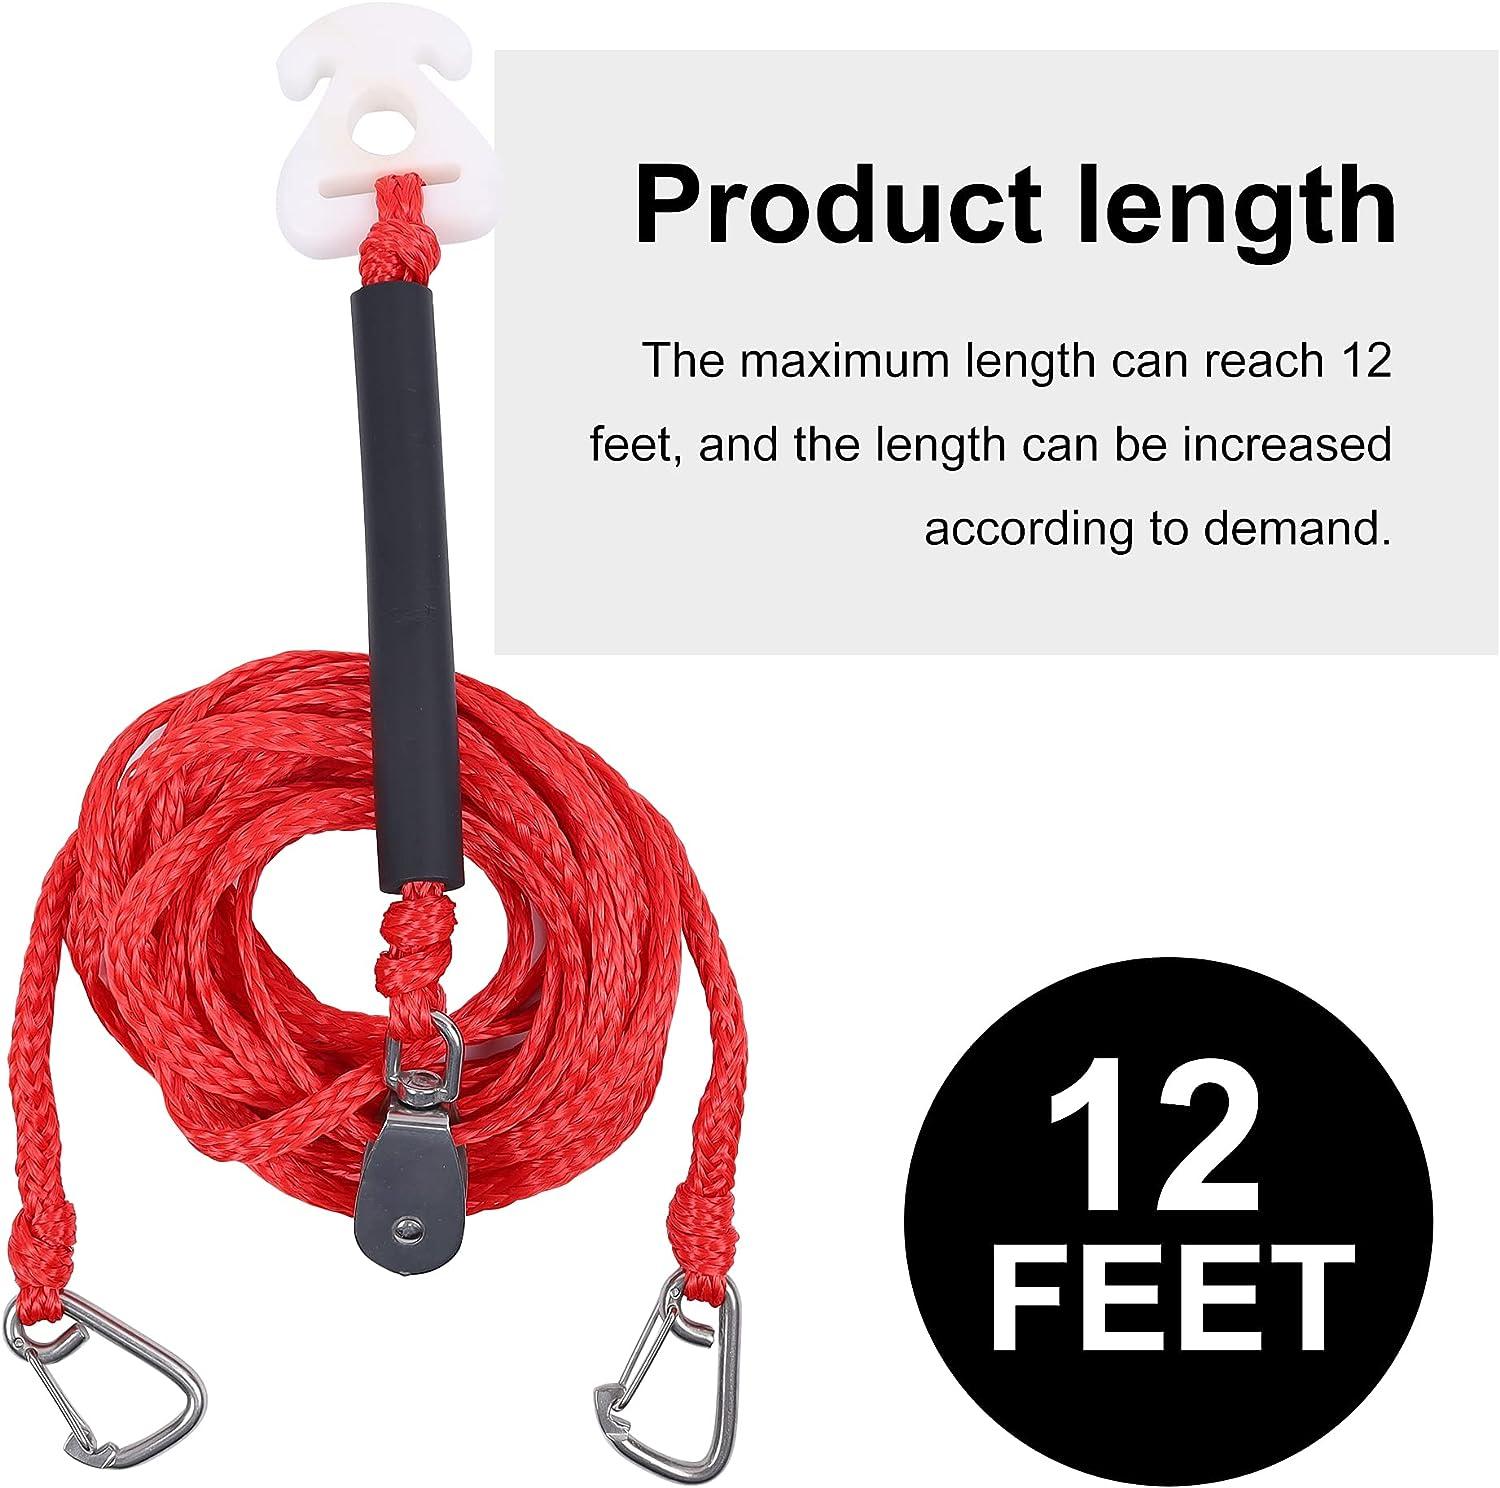 Jranter Watersports Heavy Duty Tow Harness with D Rings,13 Feet(6'+6+1') Boat  Tow Harness for Towing Towable Tube, Water Ski, Wakeboard, Red